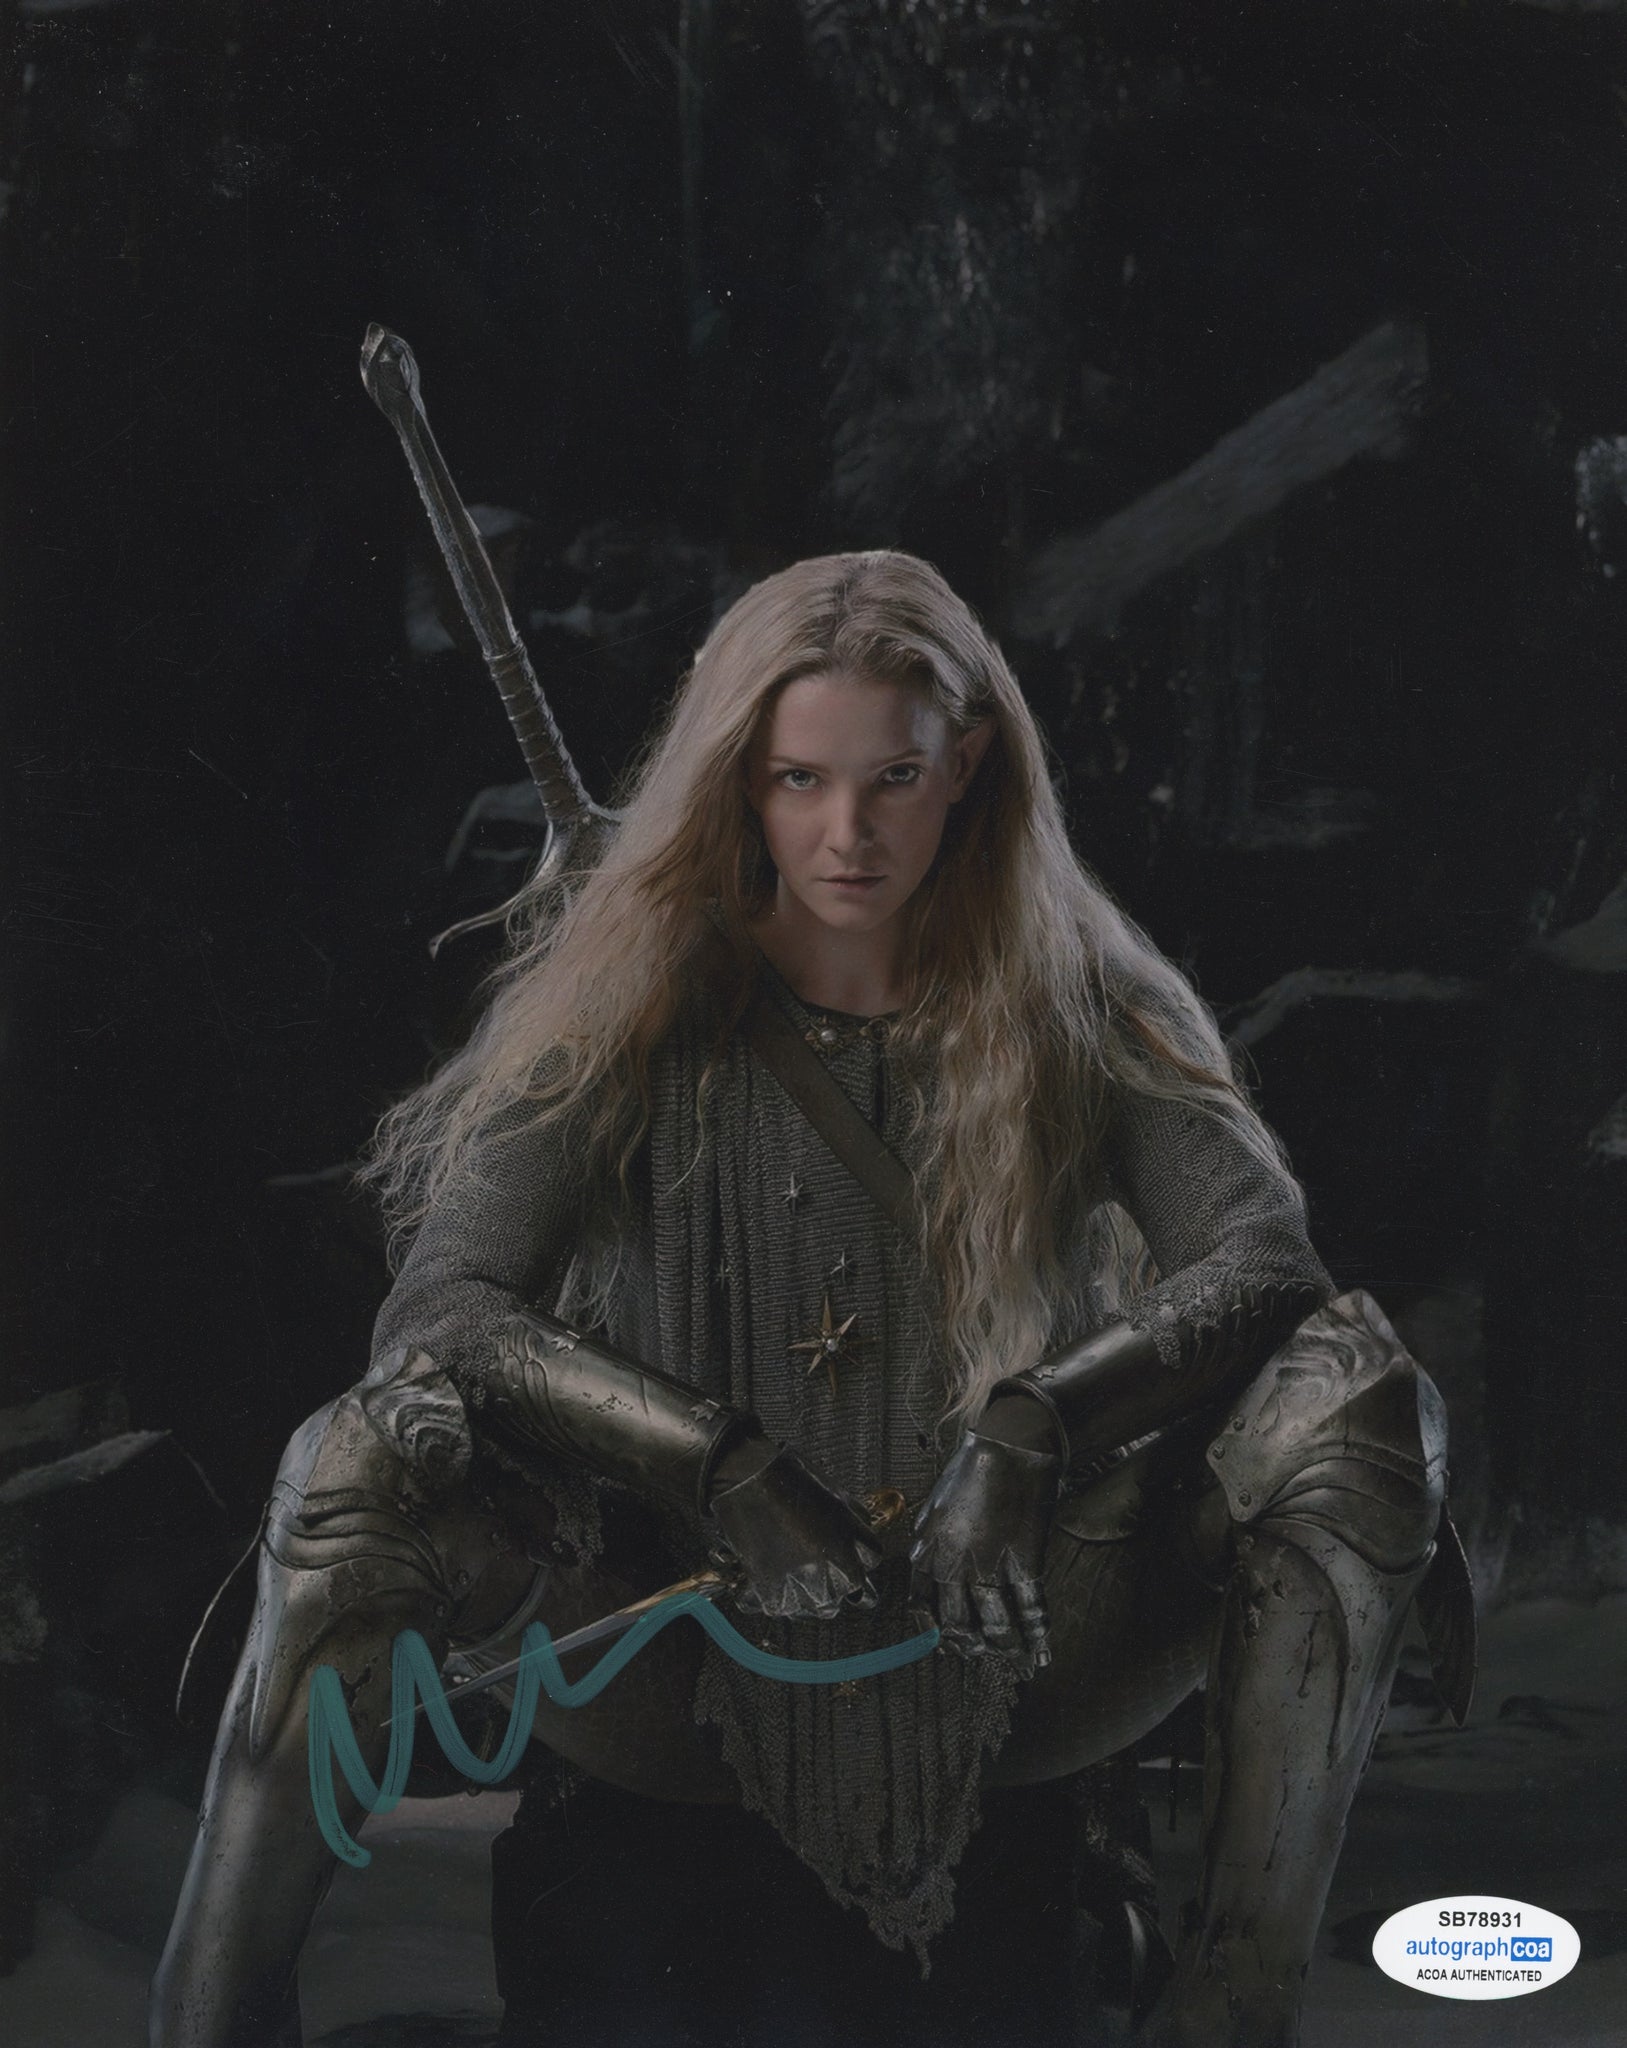 Morfydd Clark Rings of Power Signed Autograph 8x10 Photo ACOA